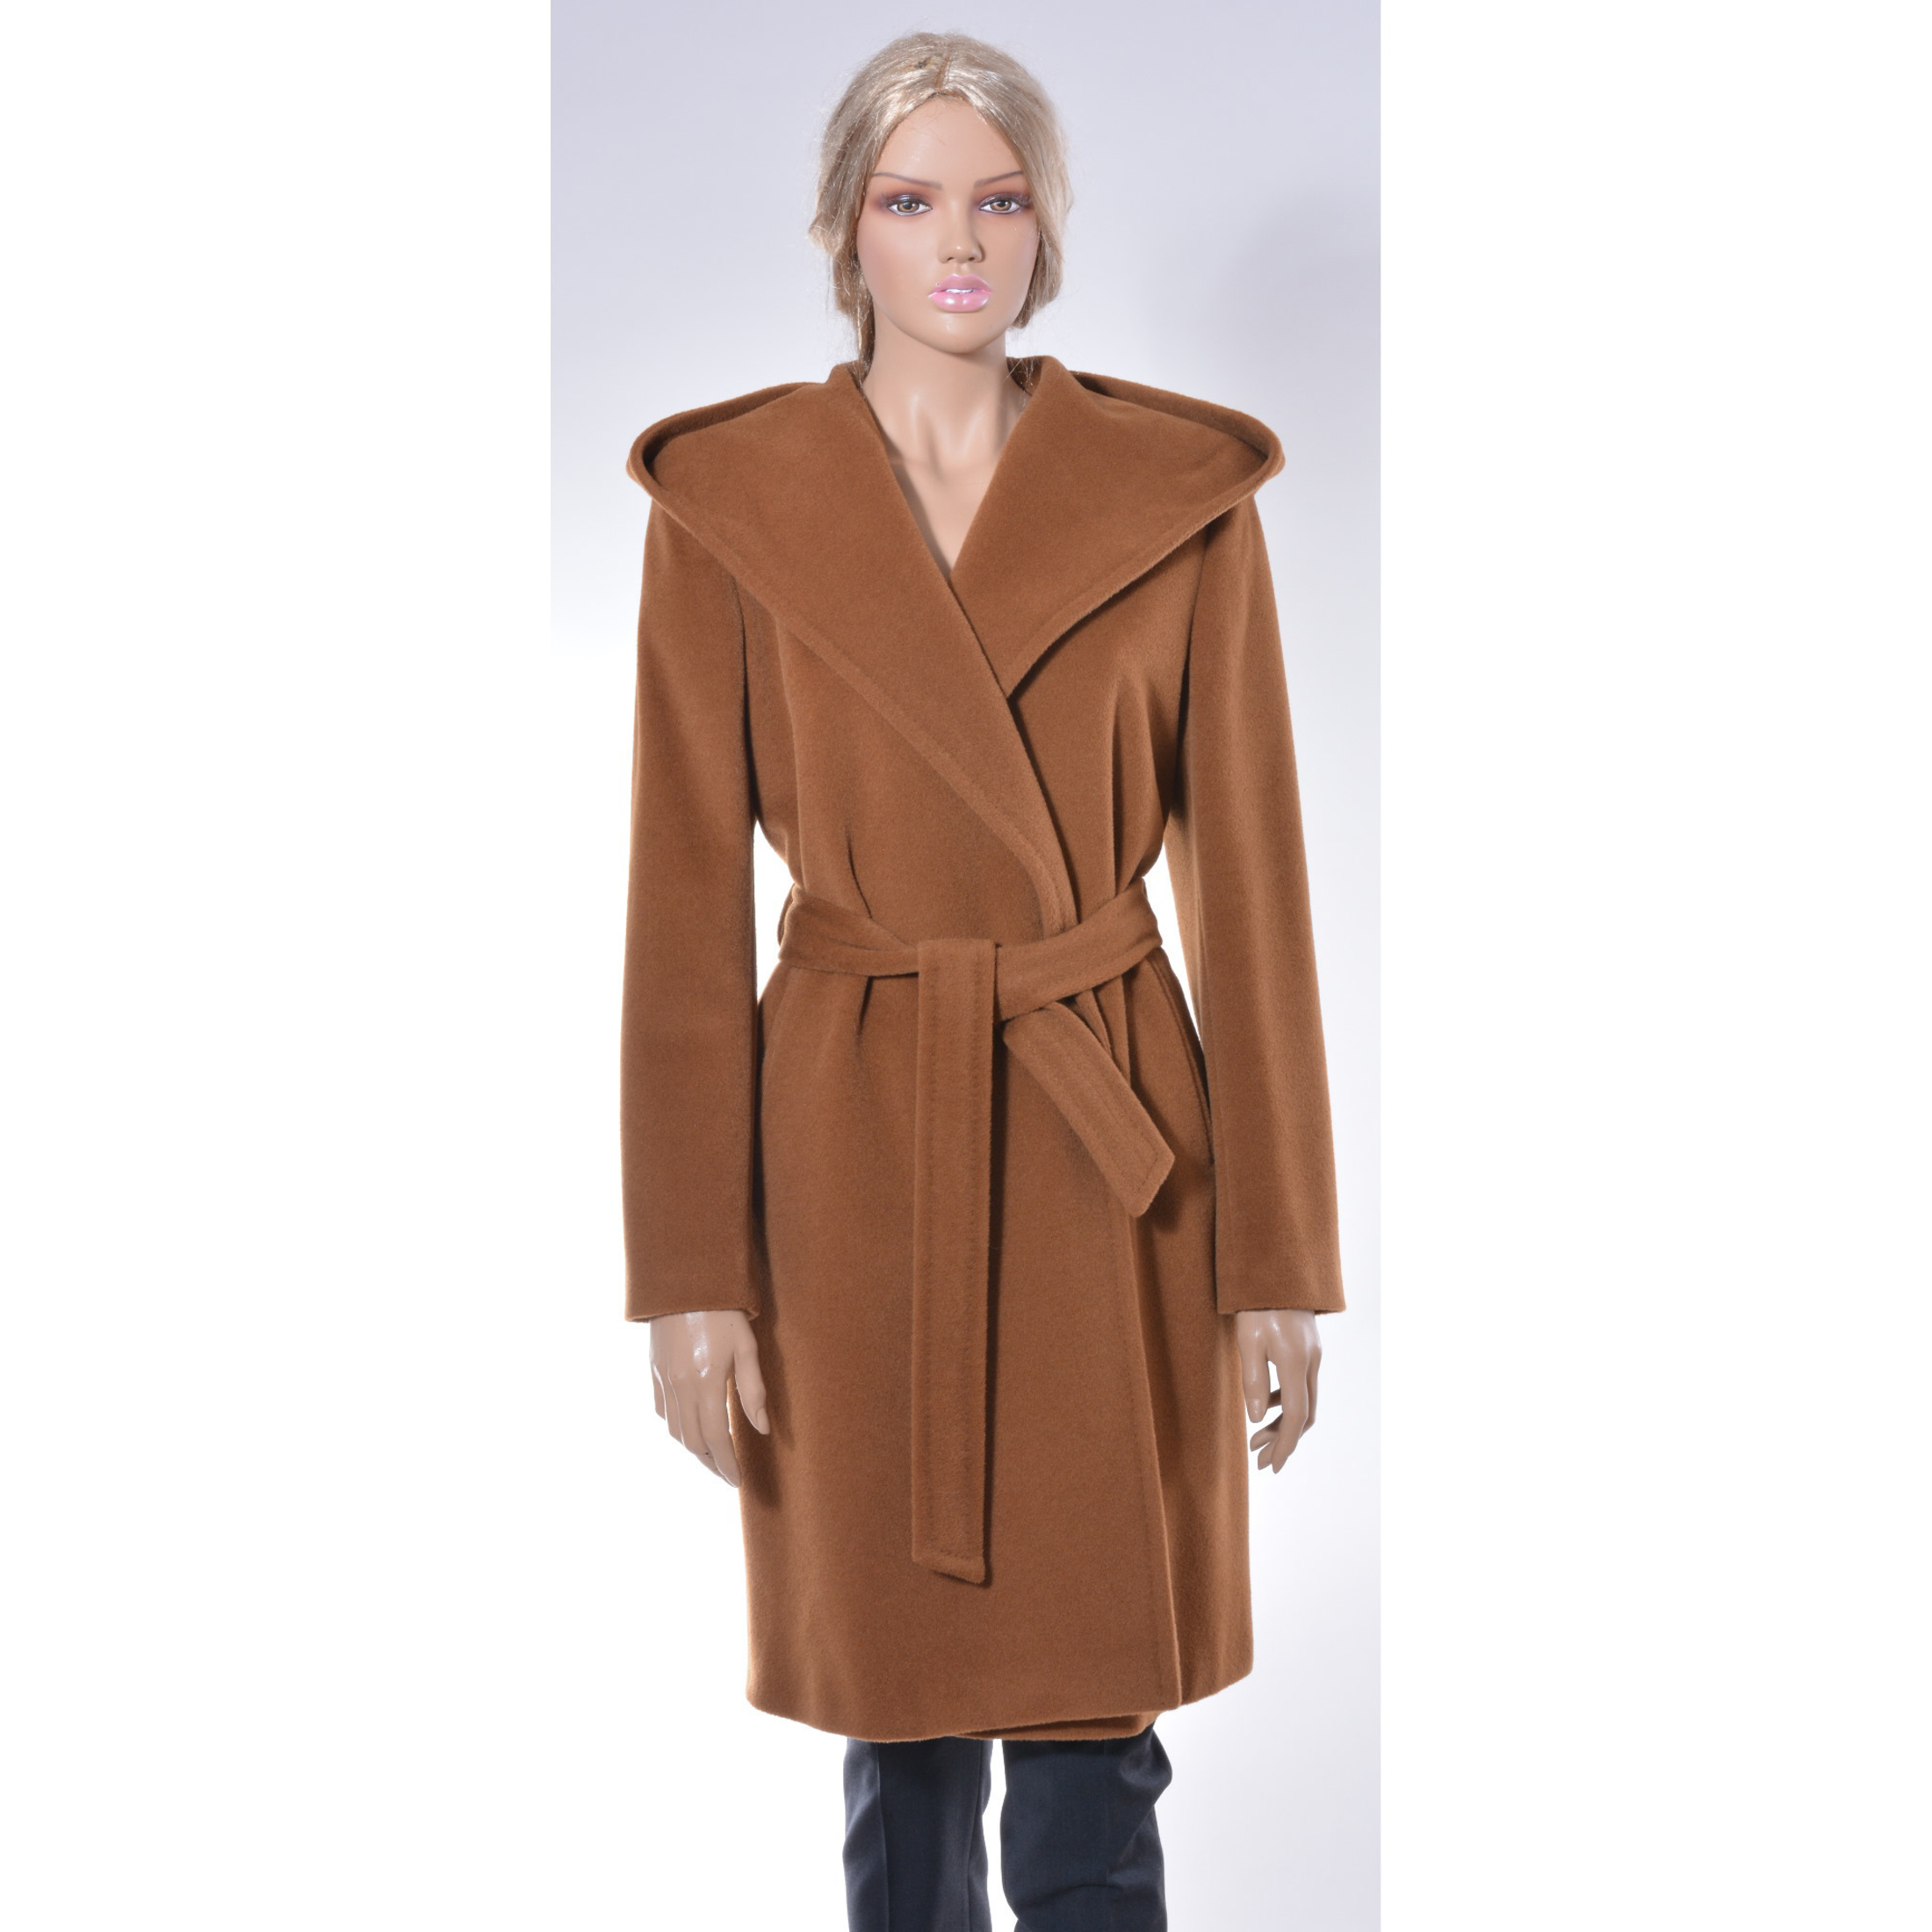 Casual camel coat with hood and belt, timeles coat, high street edition, must have, smeđi kaput,